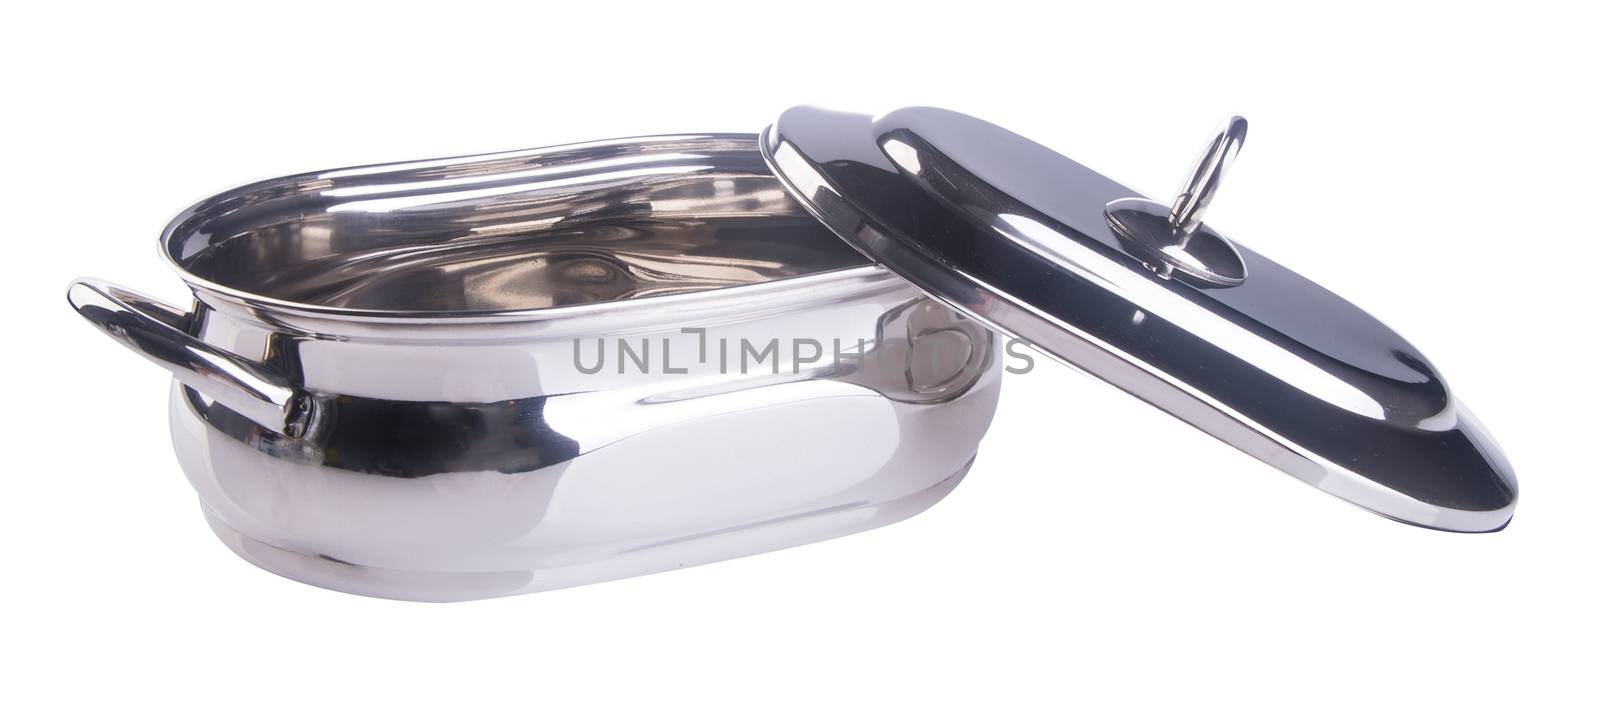 food containers, stainless steel food containers on background